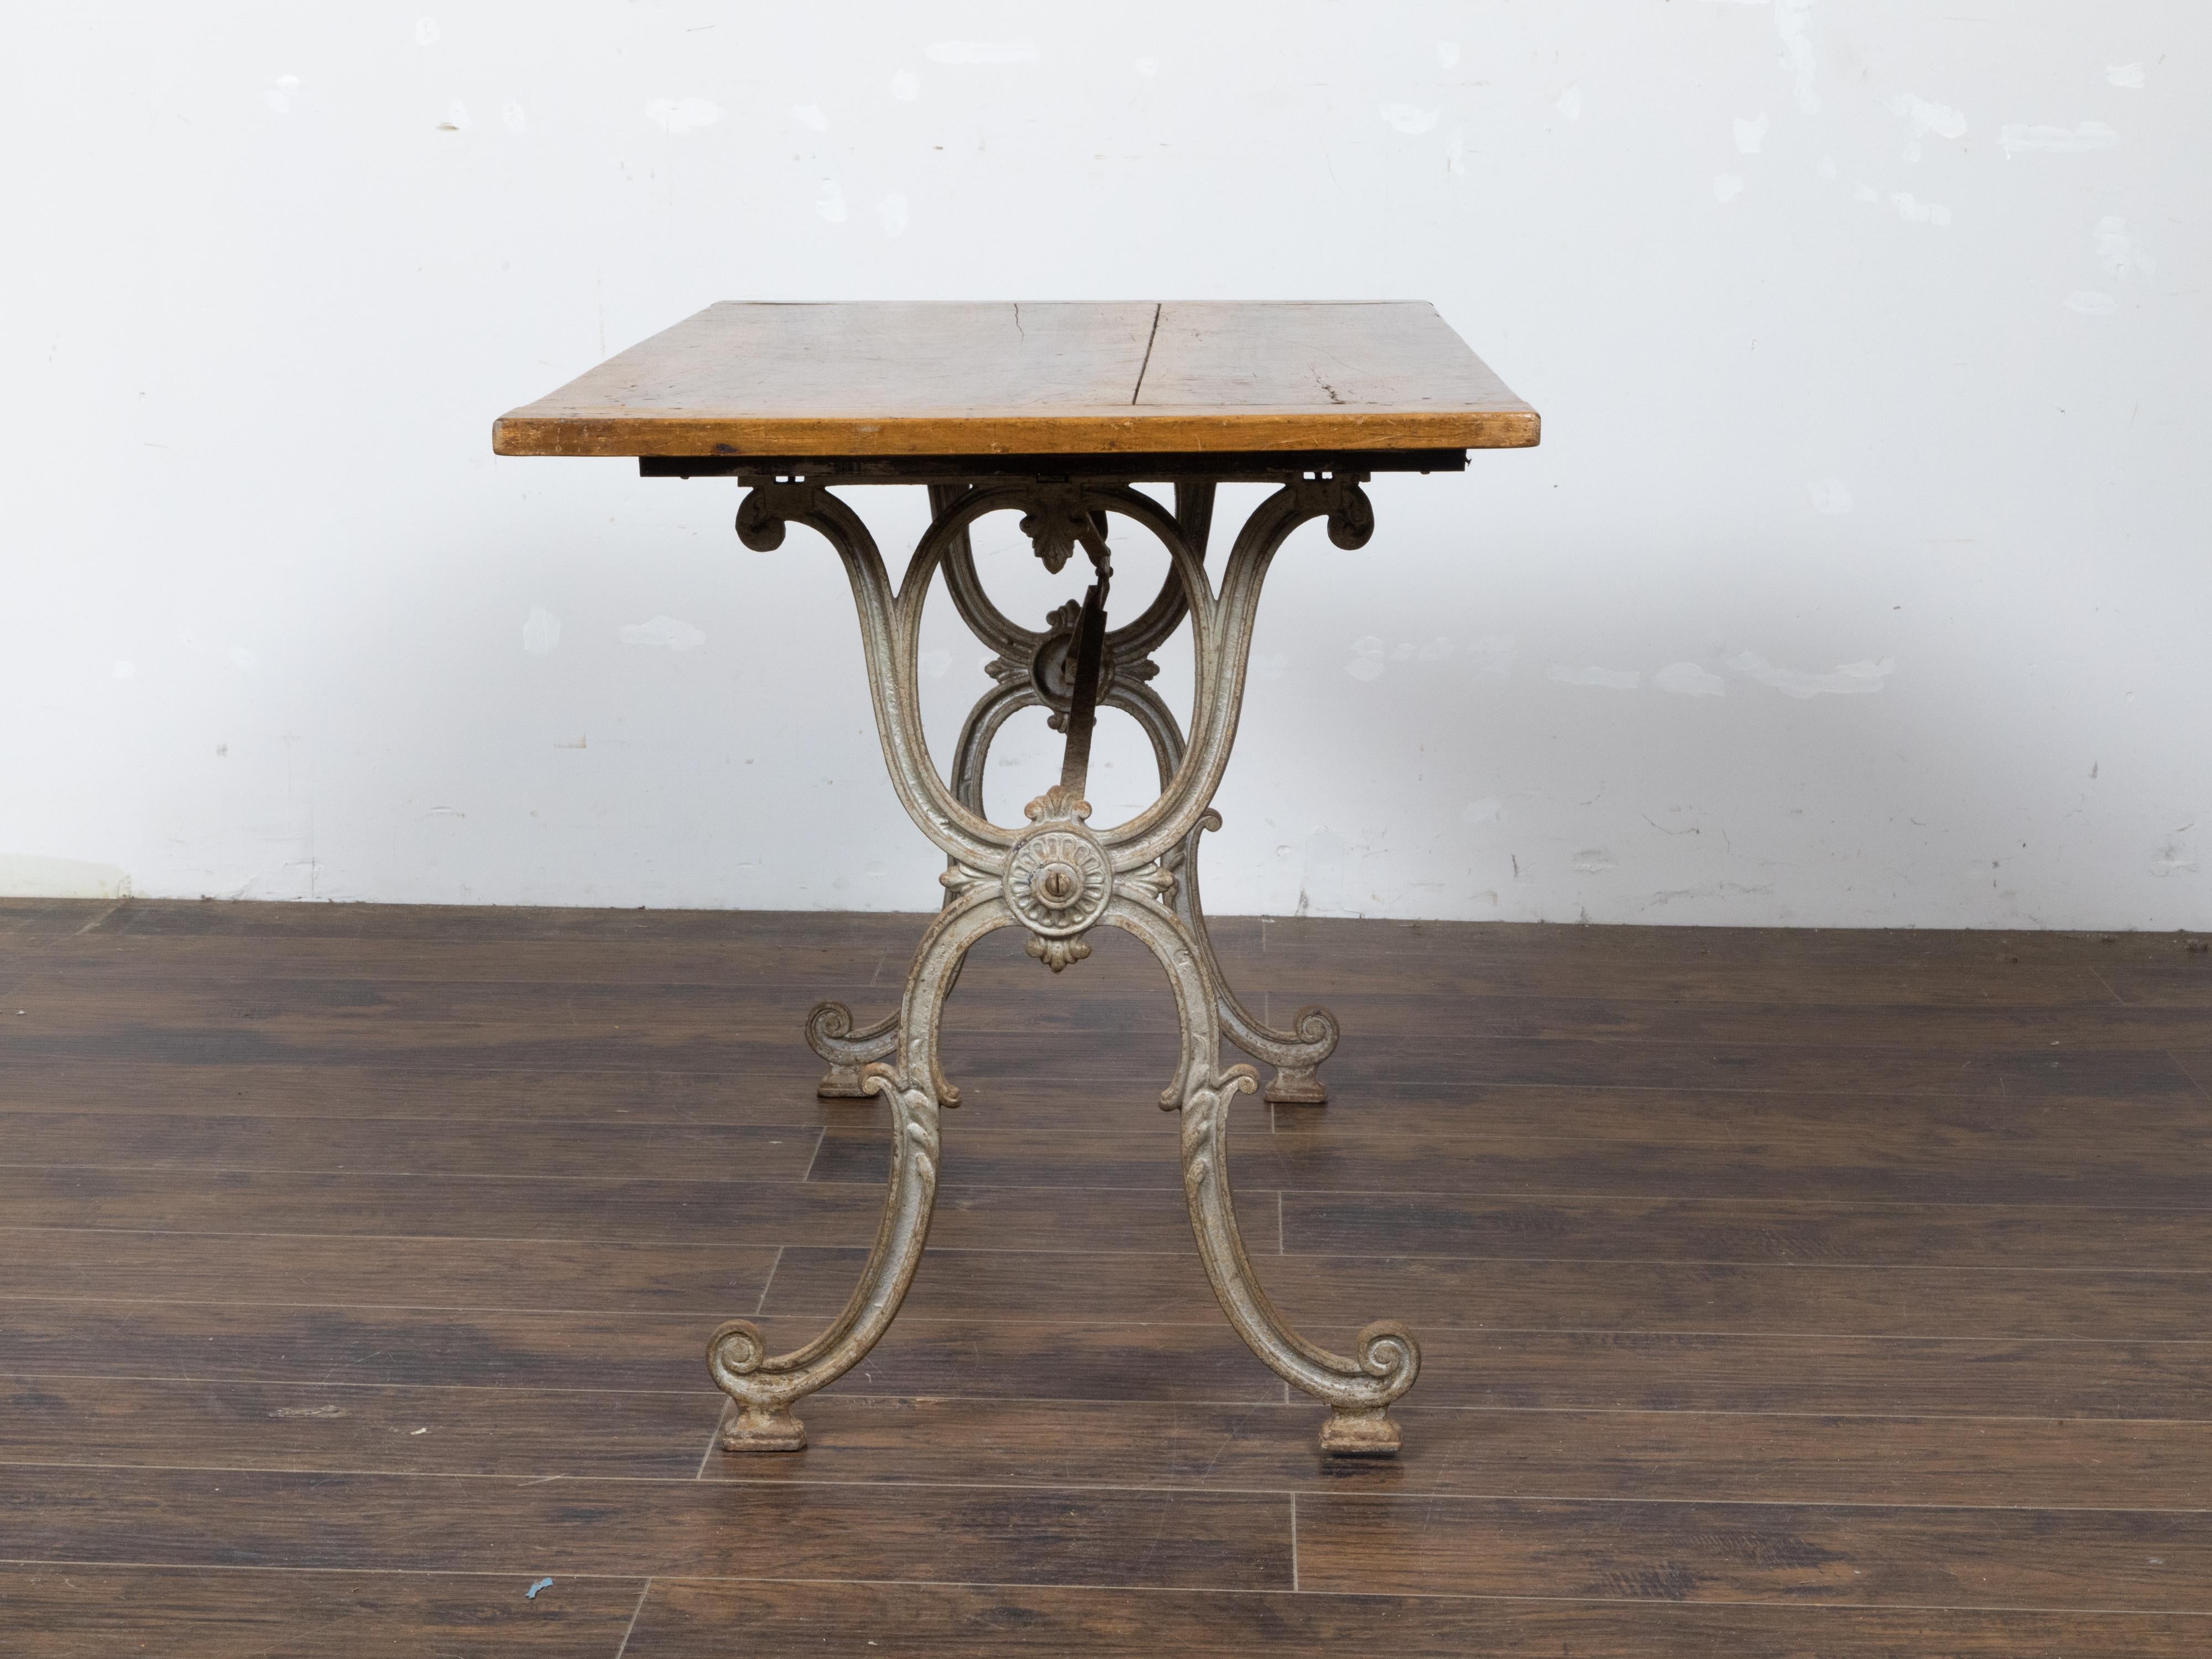 French 1900s Steel and Wood Console Table with Curving X-Form Legs and Stretcher For Sale 1